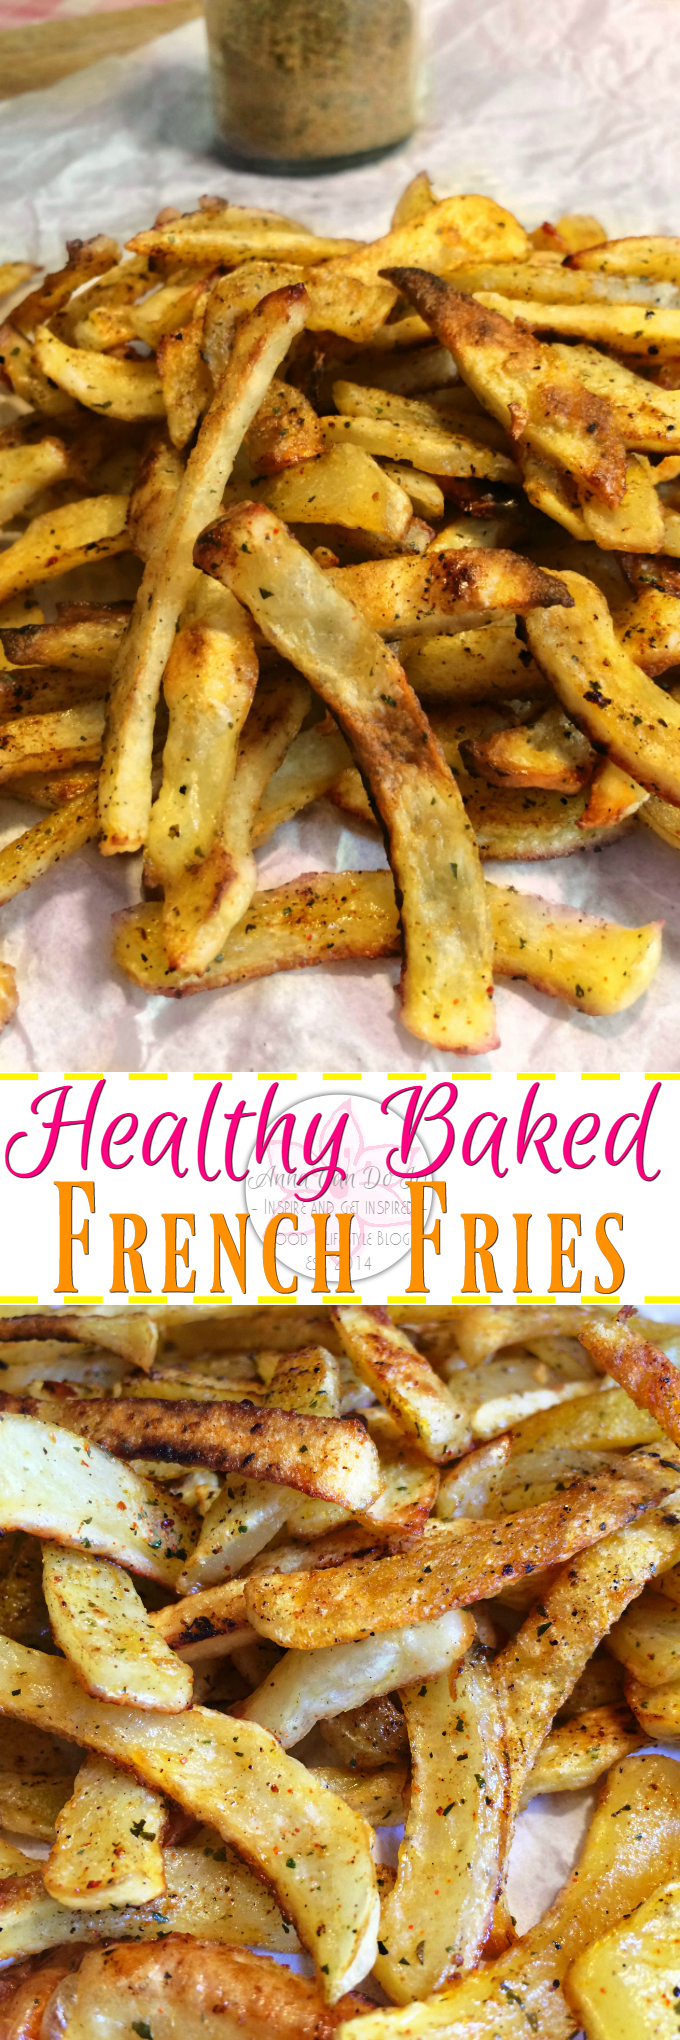 Healthy Baked French Fries - Anna Can Do It! * Spicy and Healthy Baked French Fries with crispy outside and creamy inside is perfect side-dish. It's a freezer friendly recipe, so you can make them ahead and just pop them in the oven when you need them!